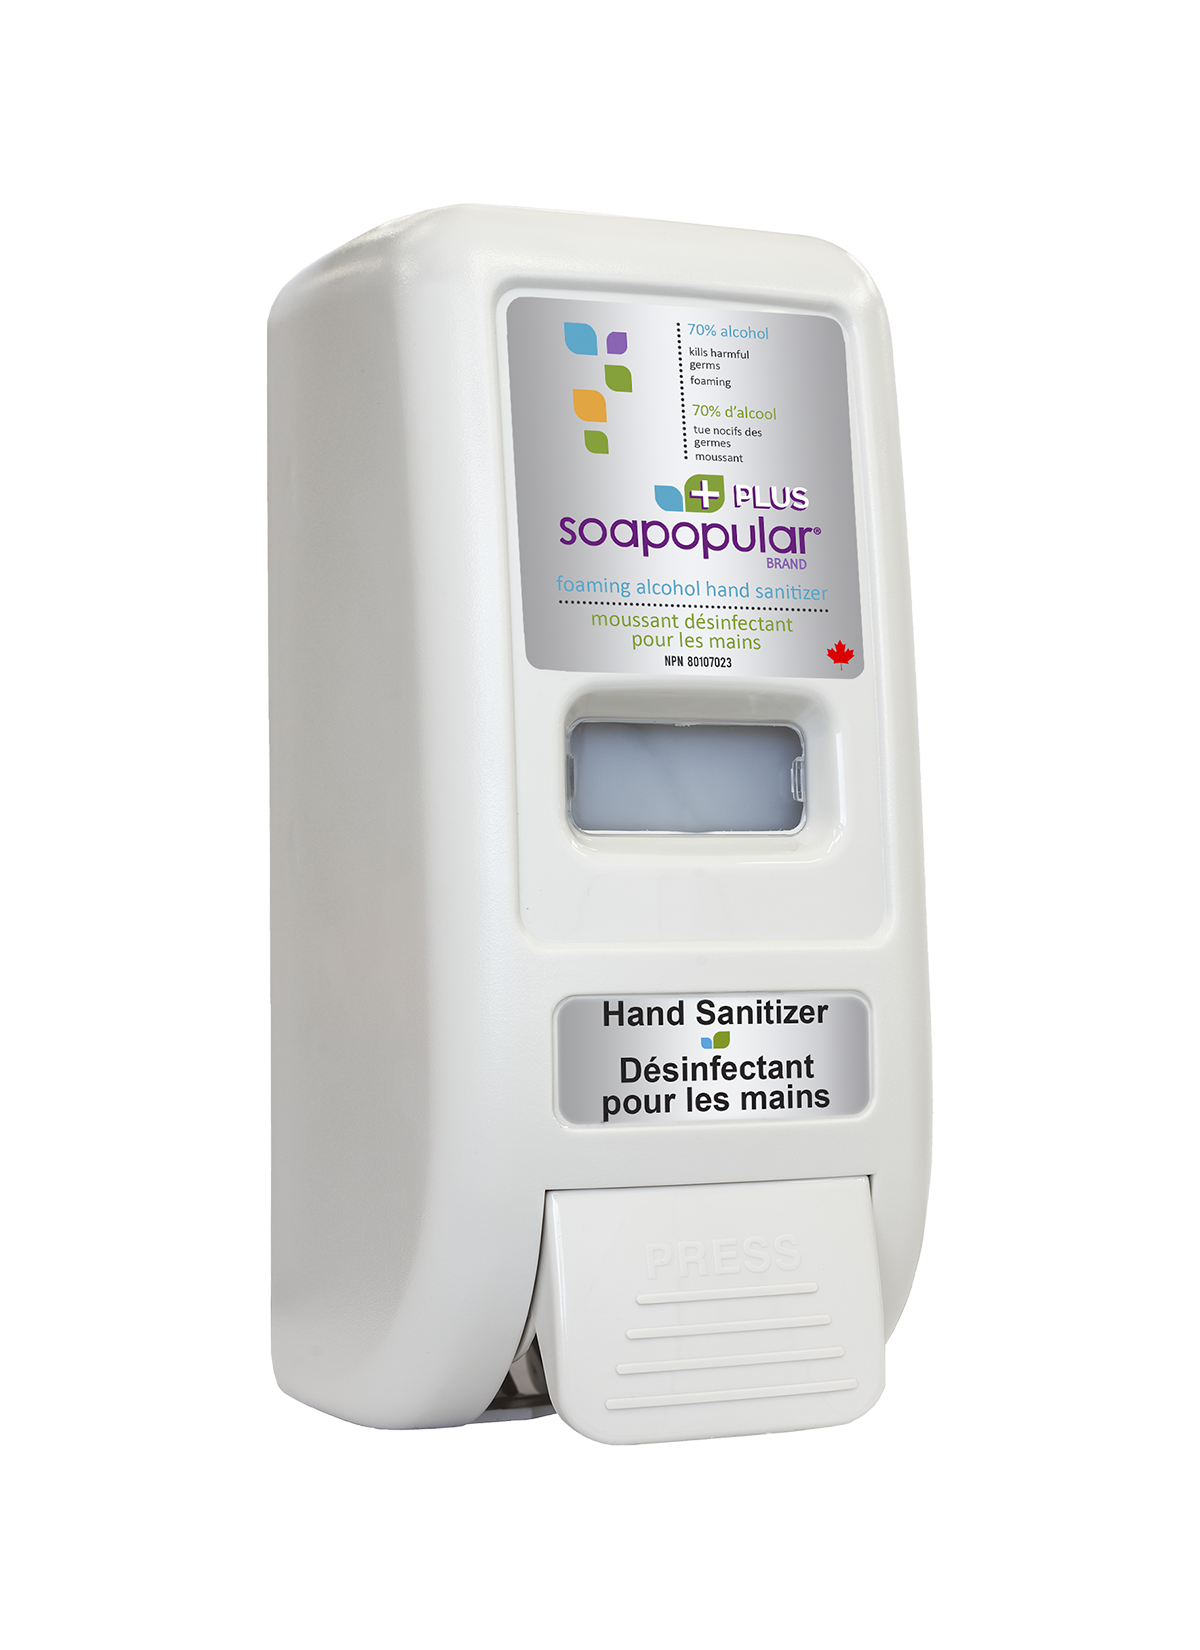 Soapopular manual dispenser holds 70% alcohol sanitizer and offers 2,600 applications.